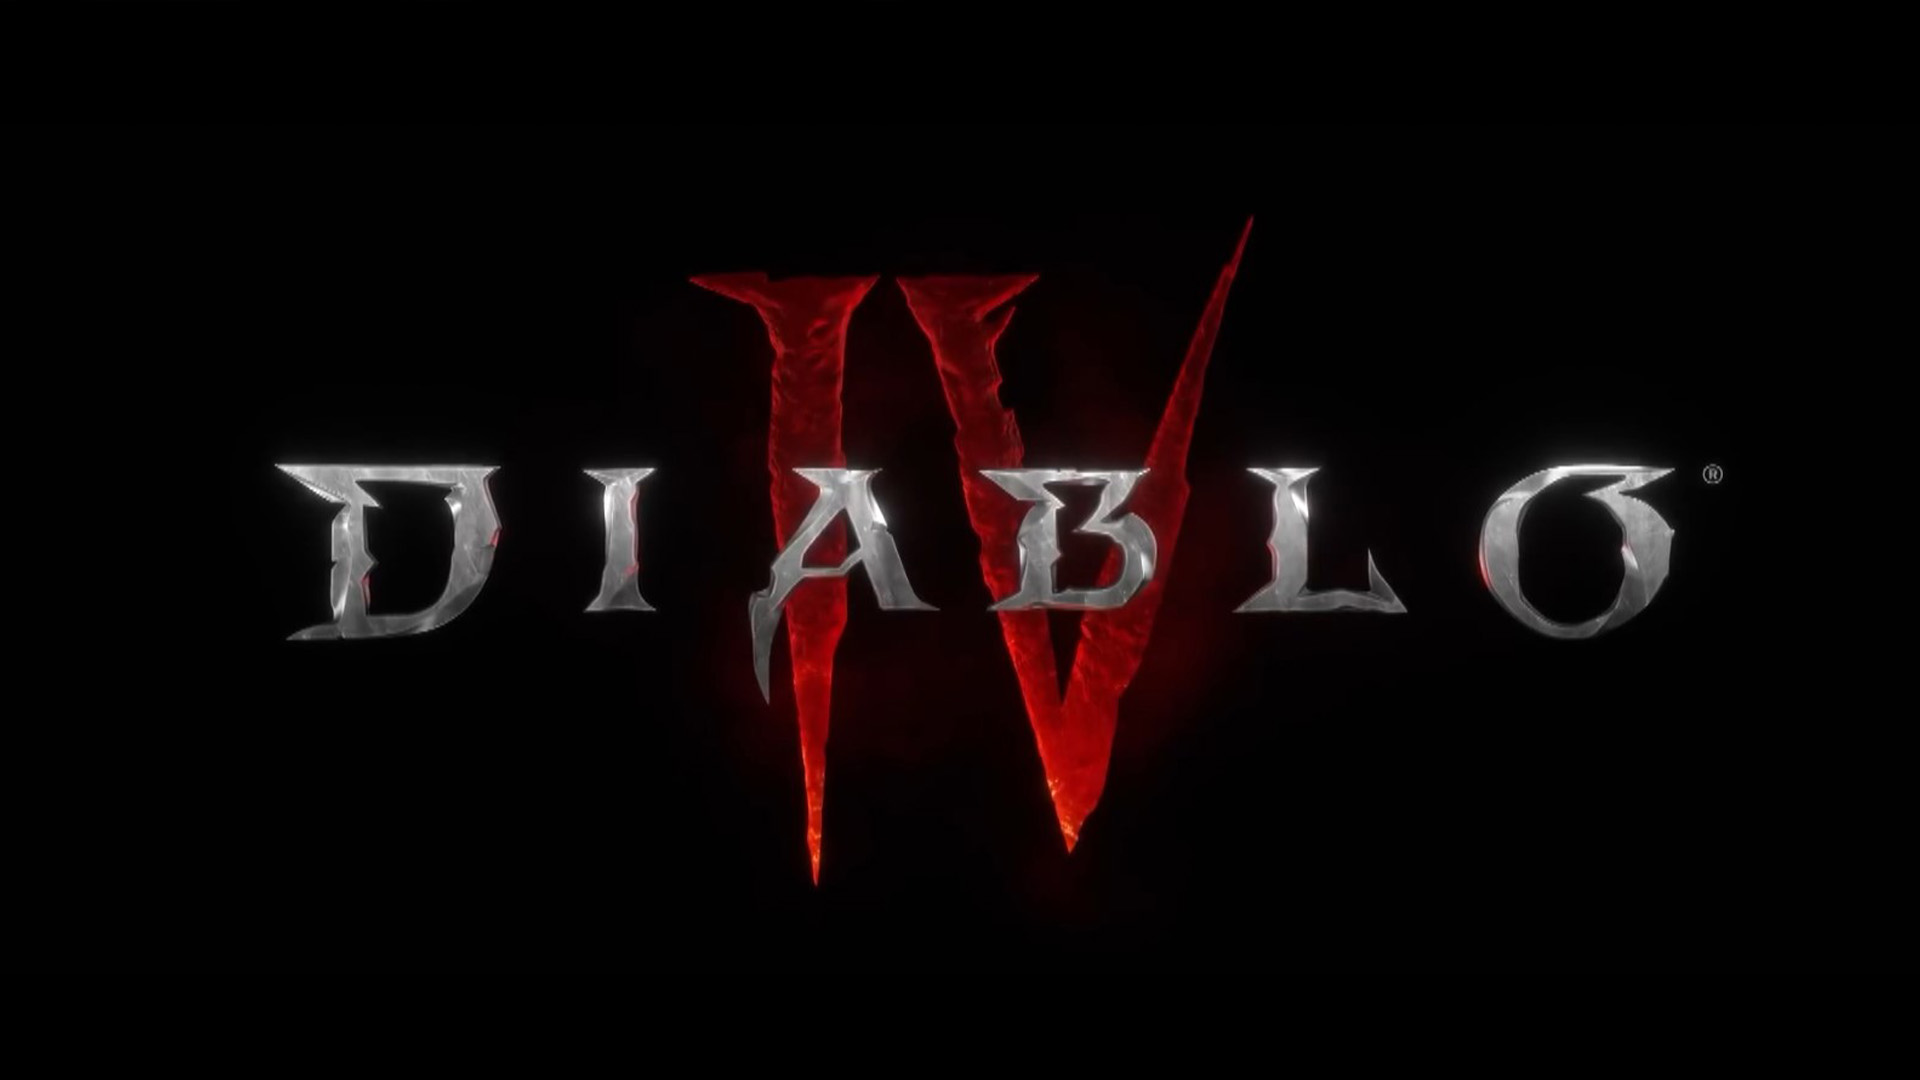 Video games: Will Diablo be available in Quebec soon?